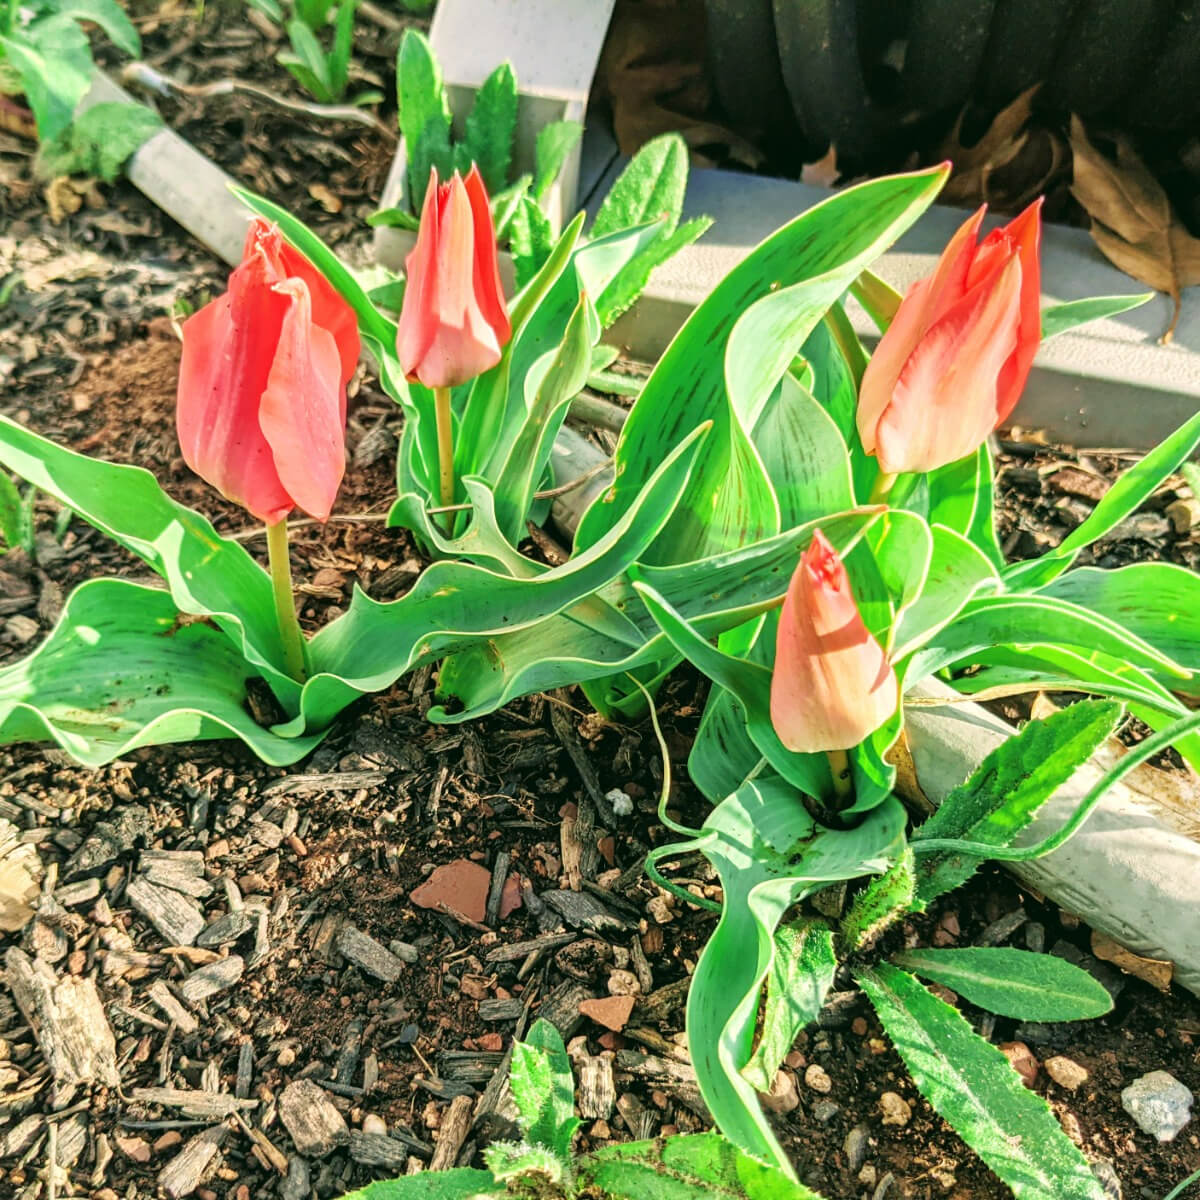 Transplanting Tulips in the Garden - Coral Tulips growing near the hose